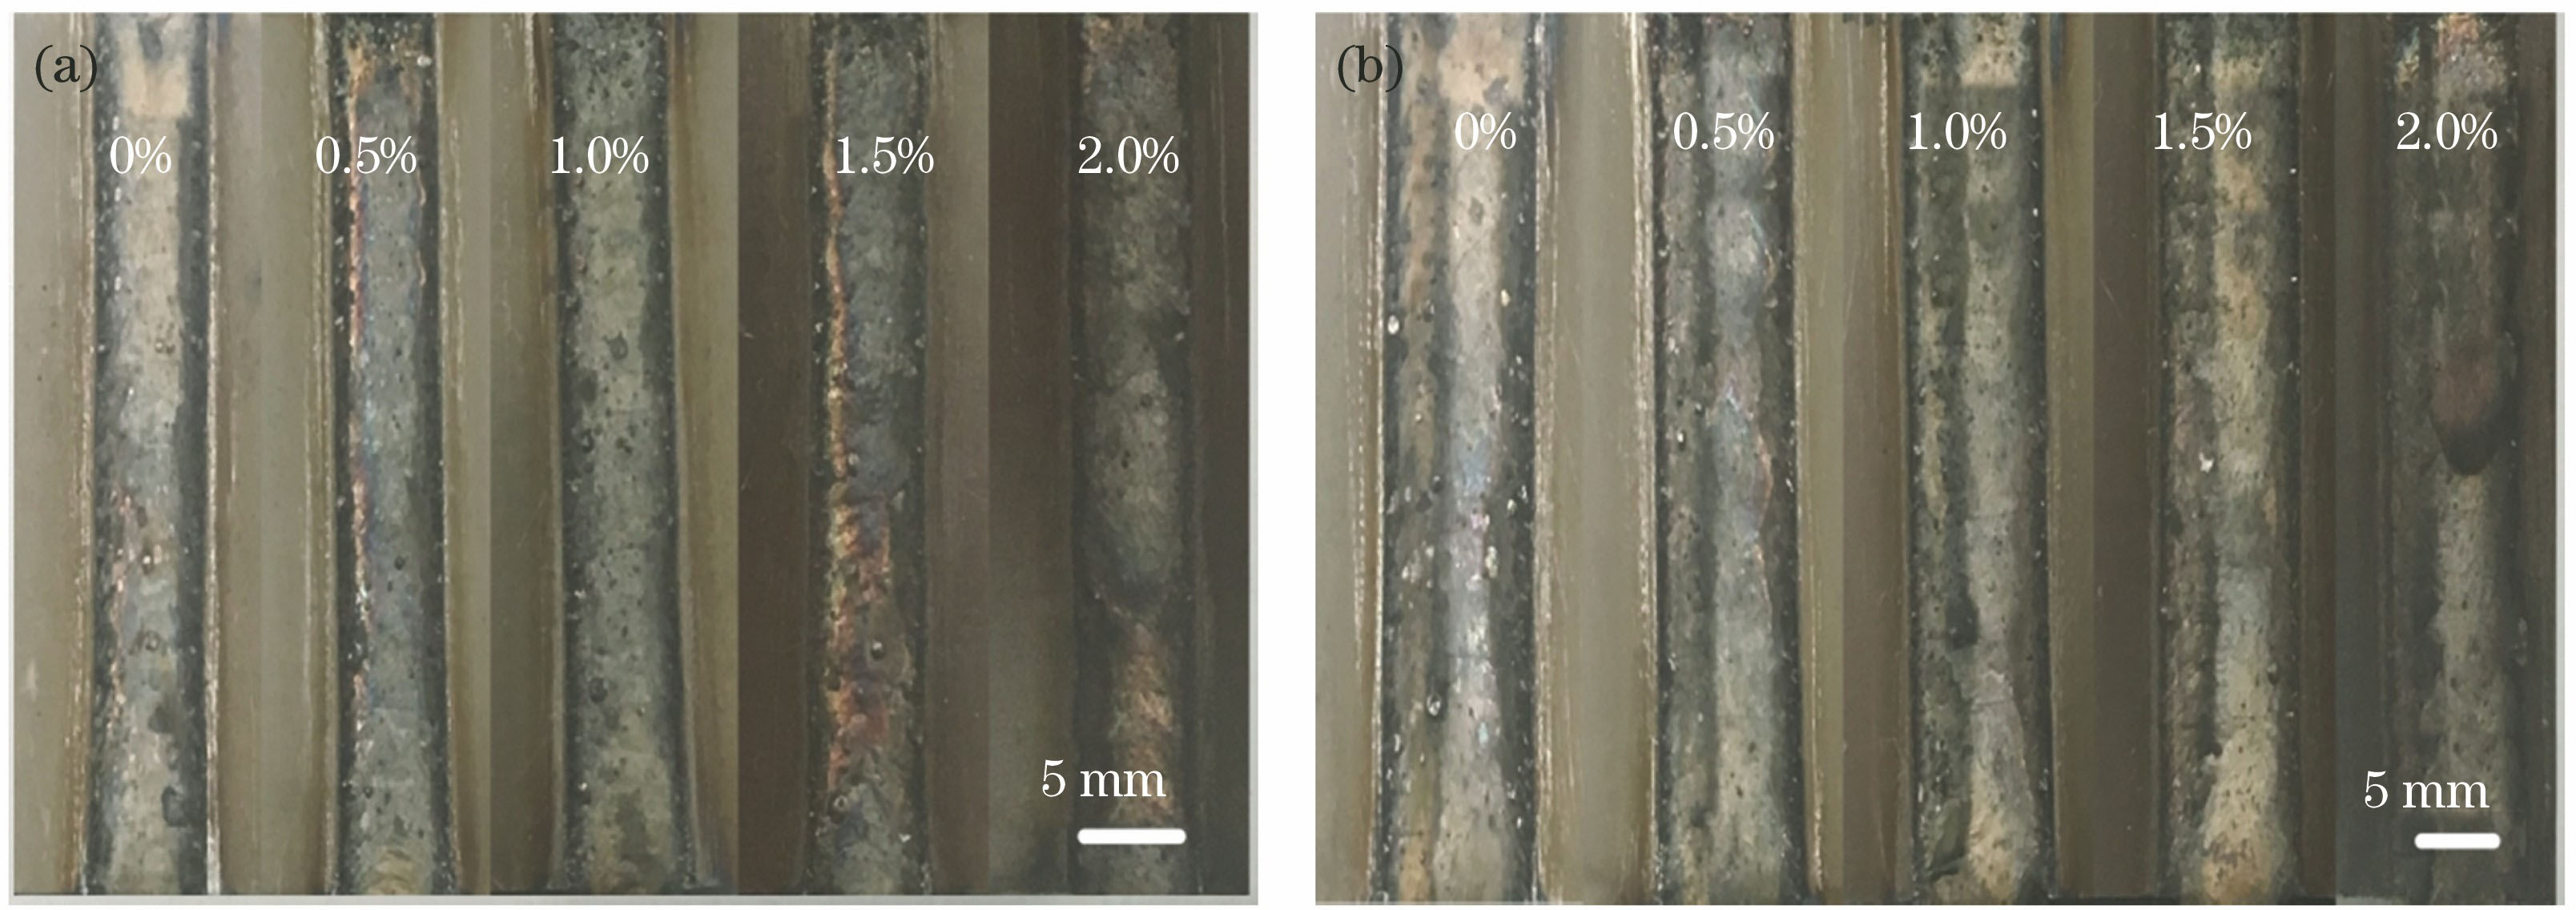 Surface morphologies of coatings with different CeO2 contents. (a) Single-pass laser cladding; (b) multi-track laser lap cladding